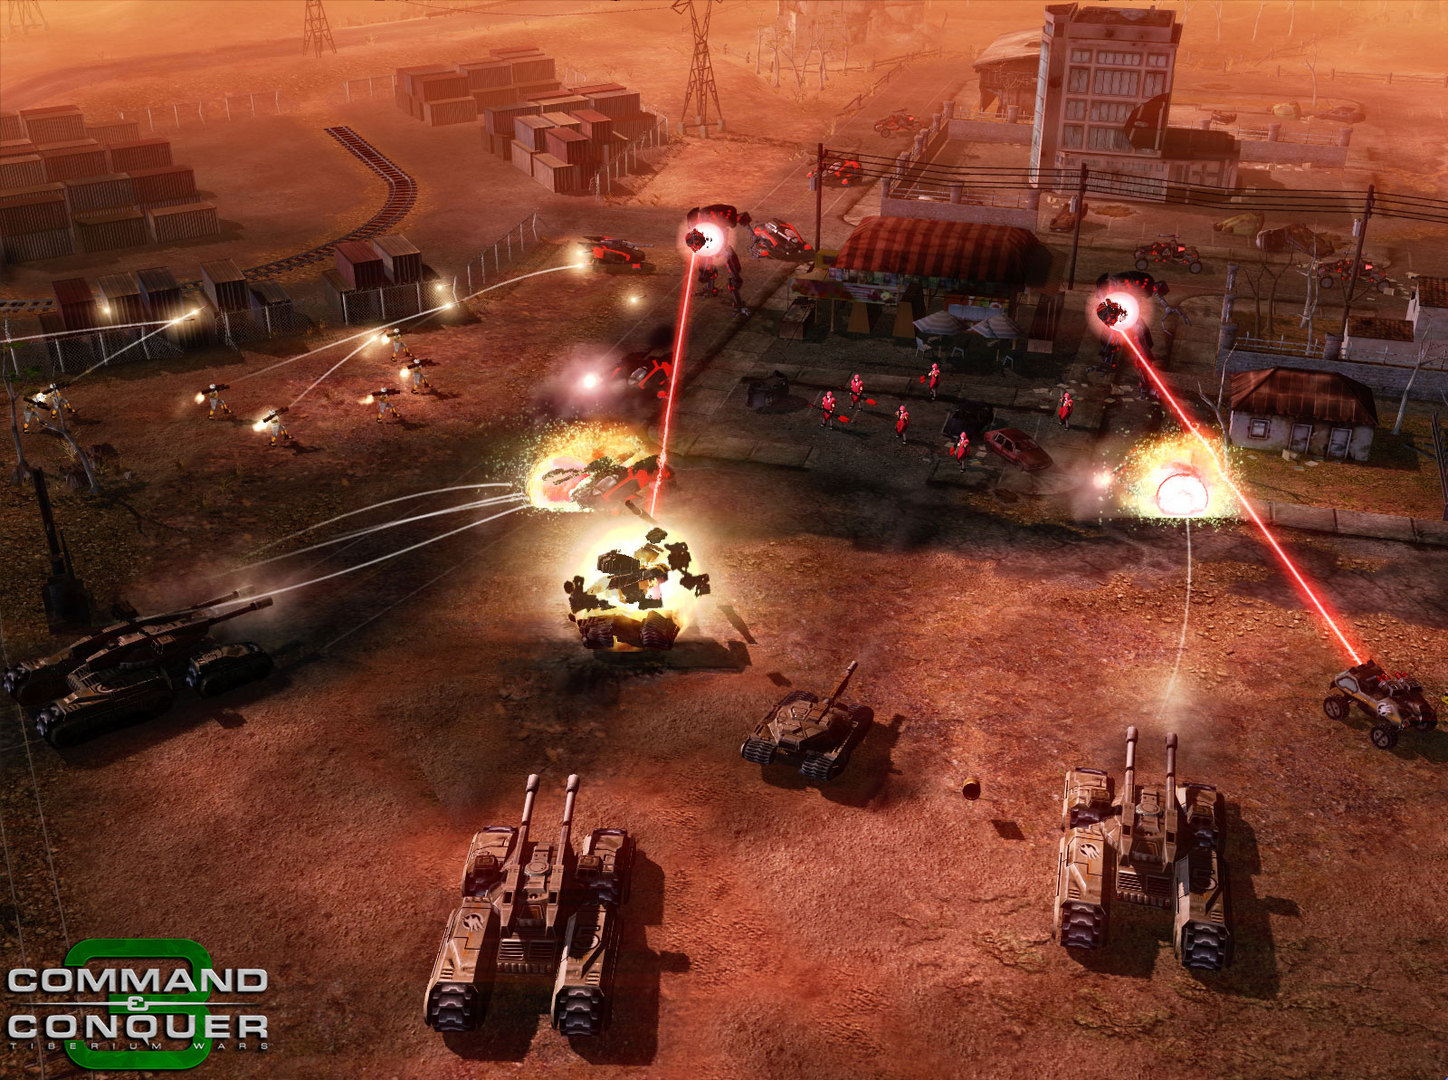 Save 90% on Command & Conquer 3: Tiberium Wars on Steam